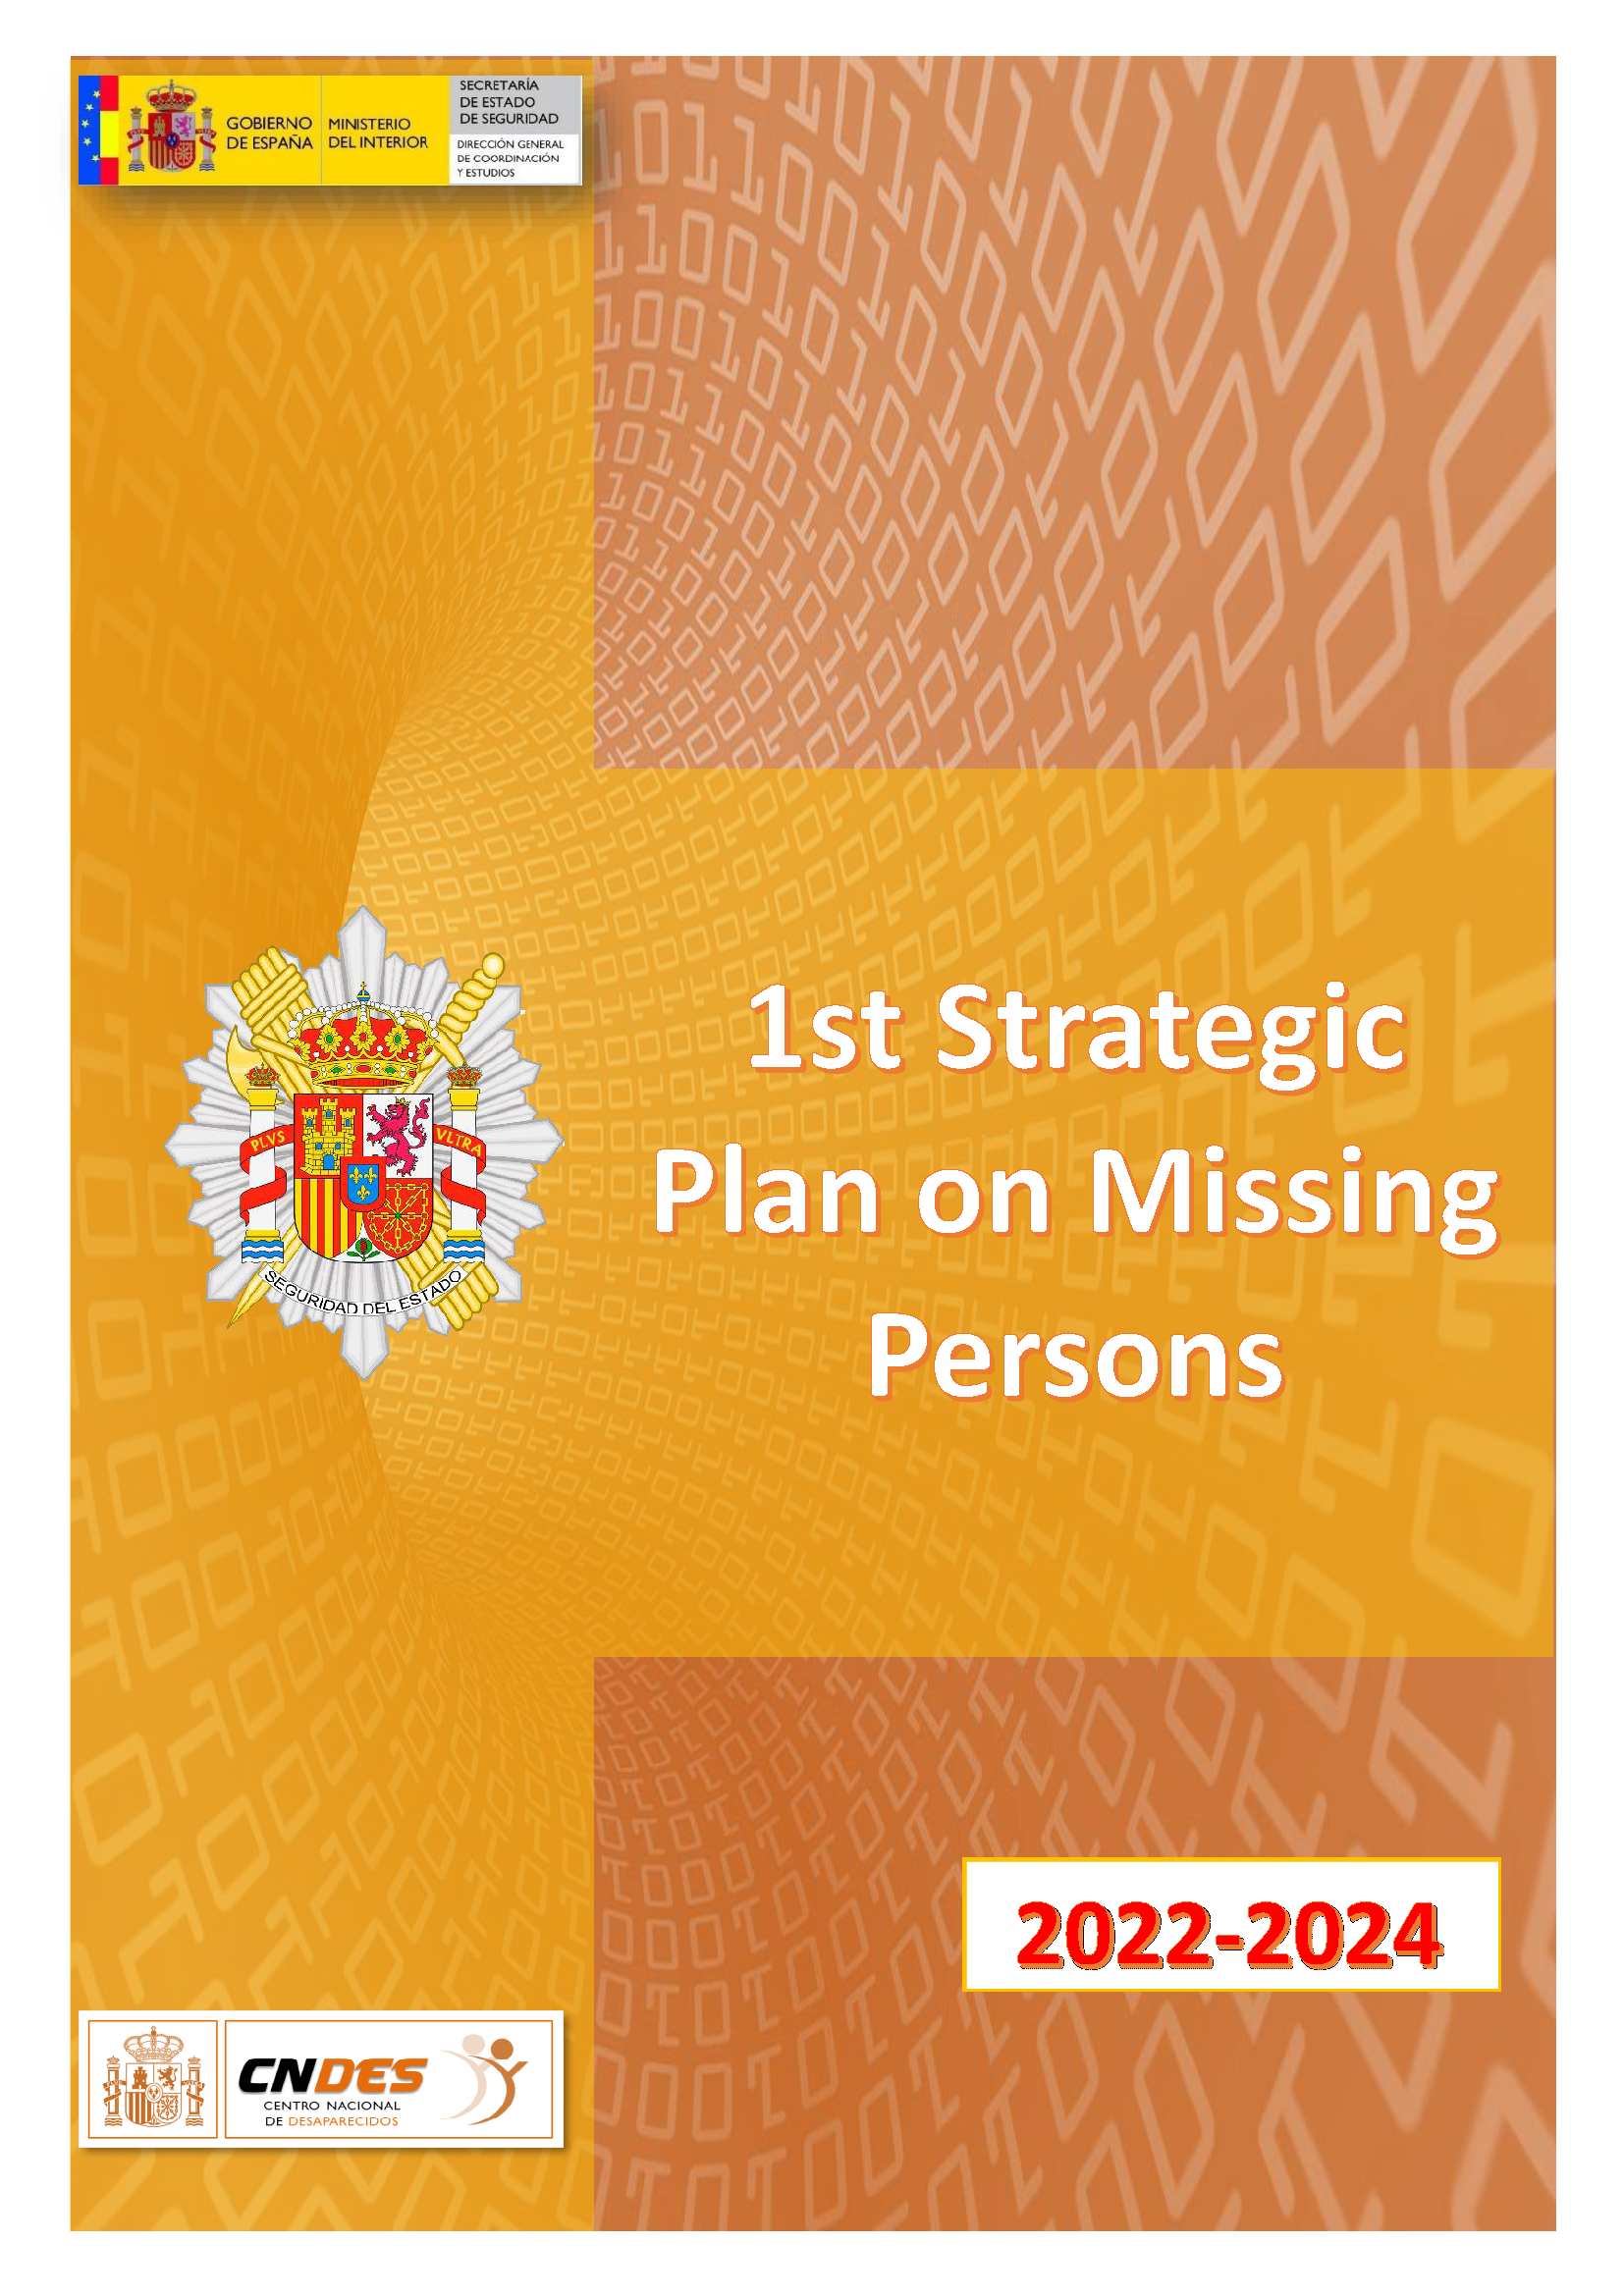 1st Strategic Plan on Missing Persons (2022-2024)